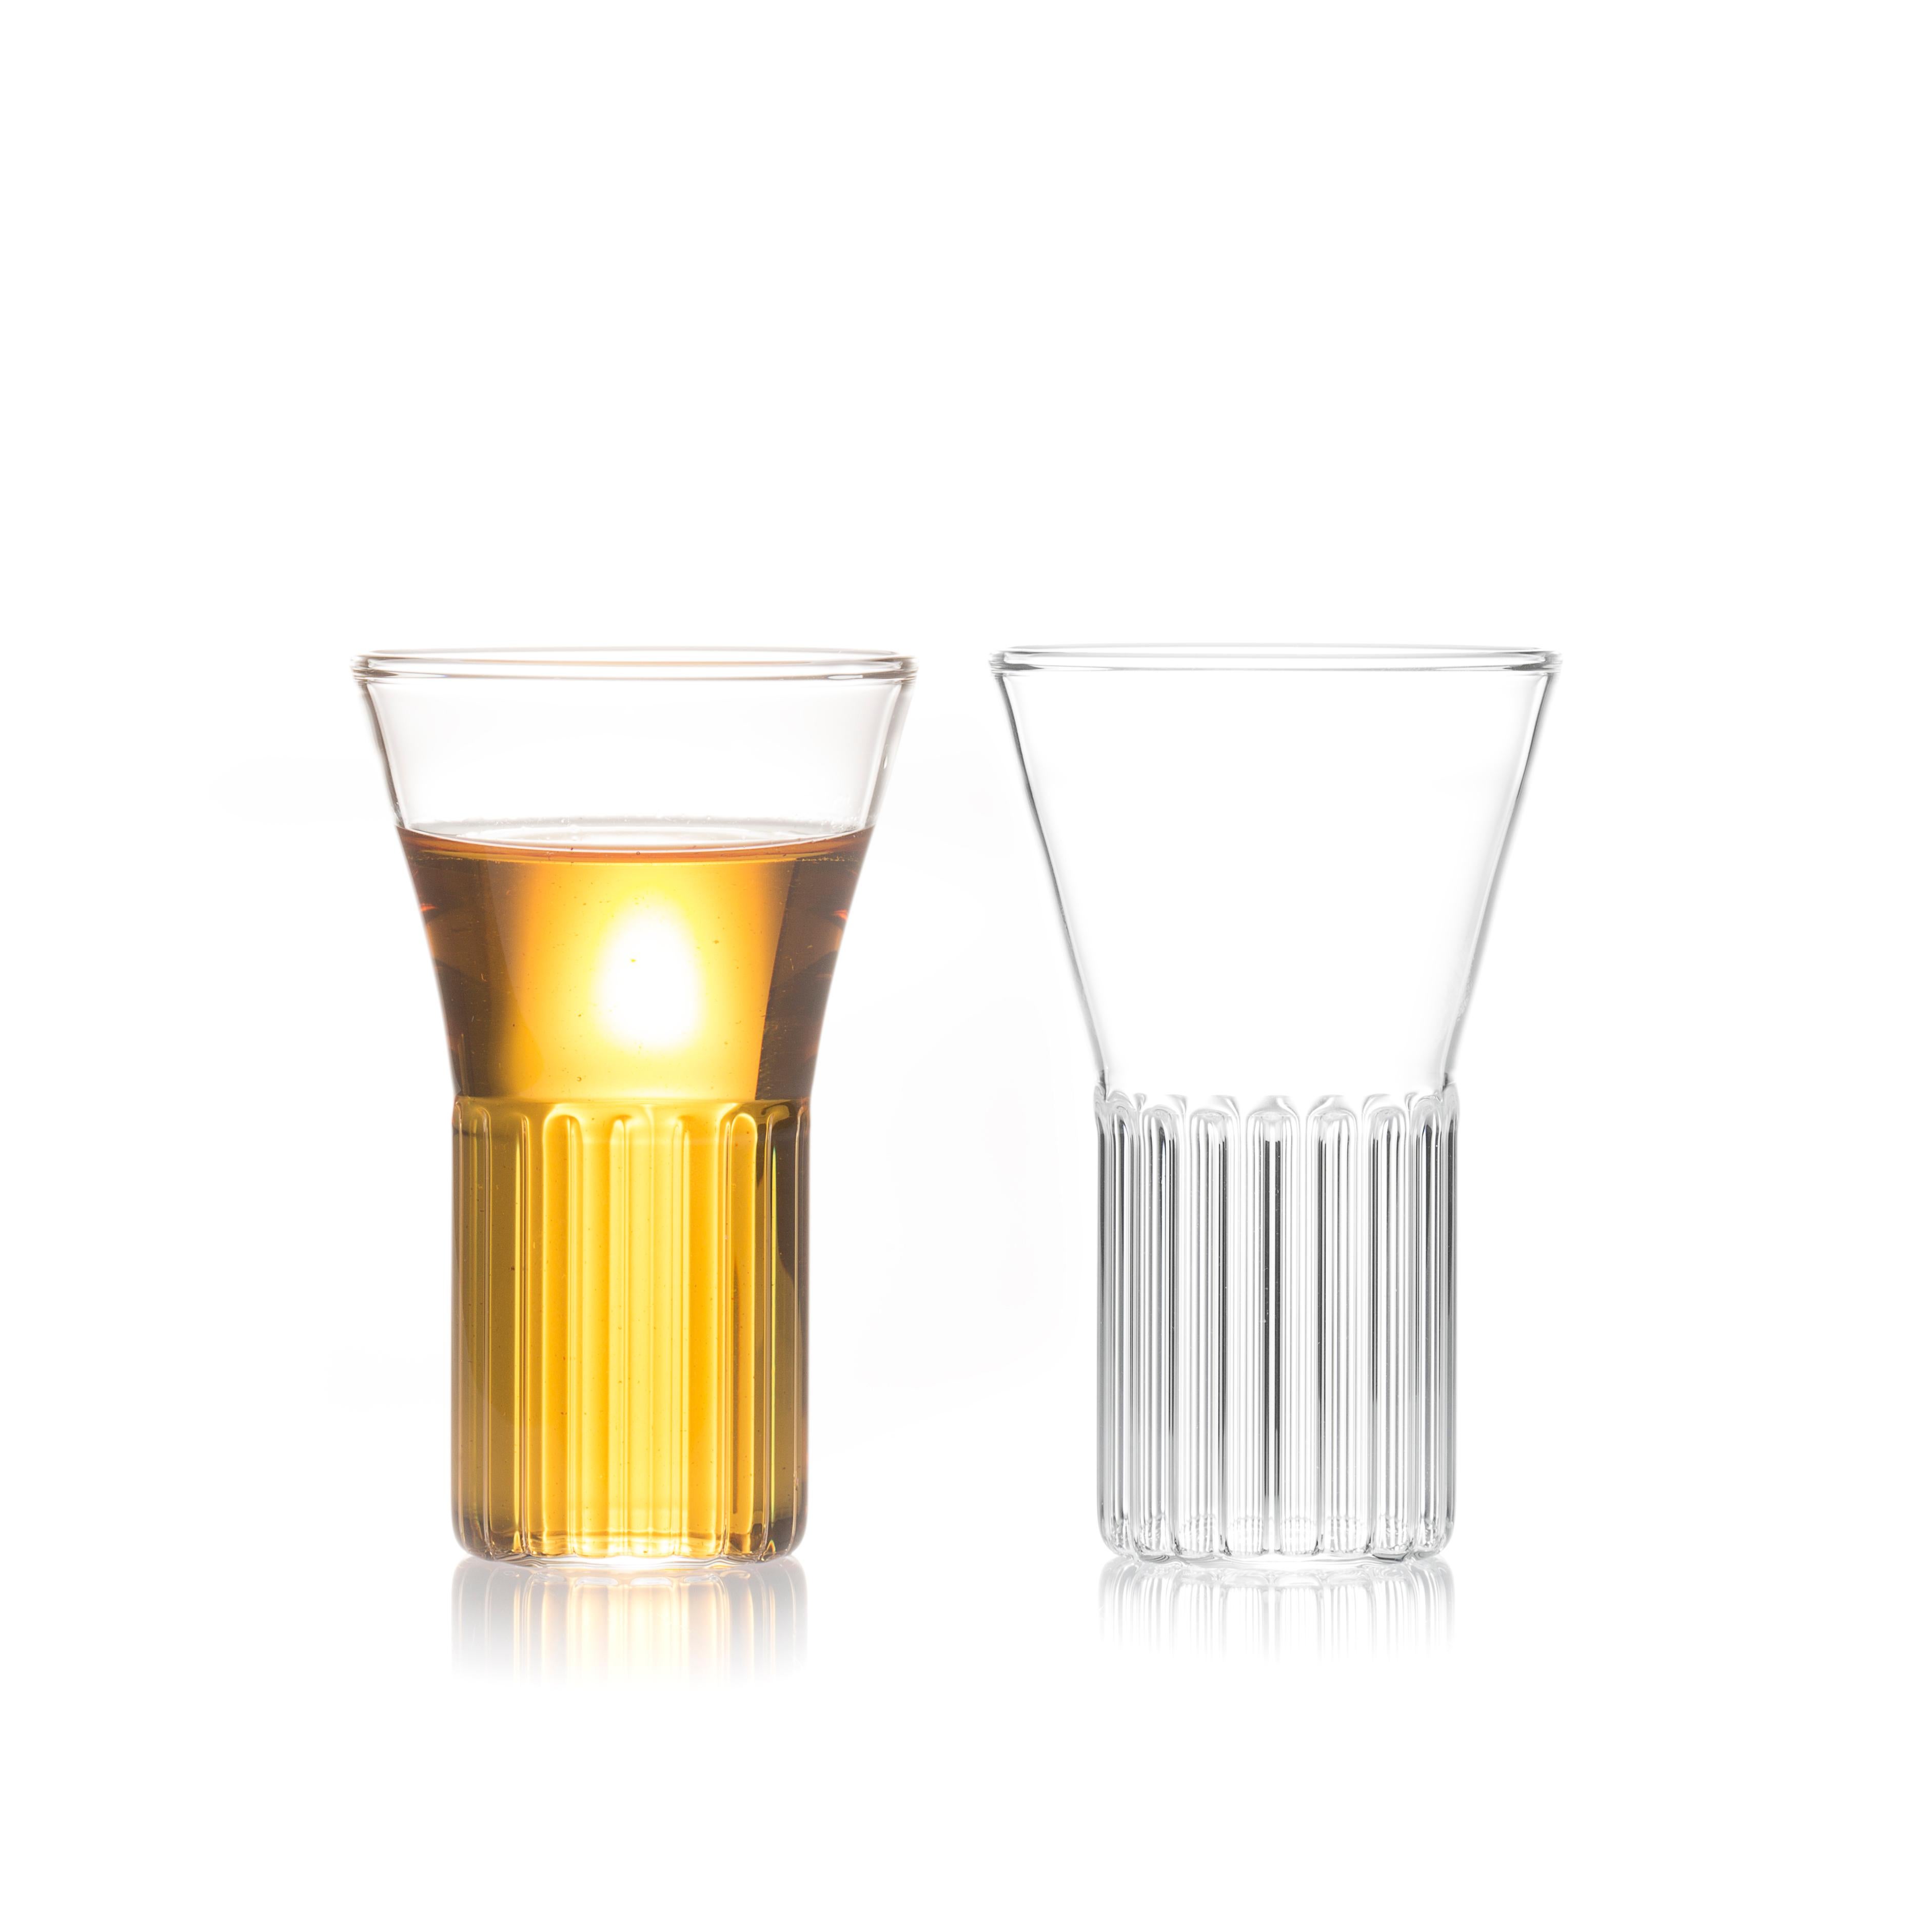 Rila Small Glasses, Set of two

Inspired by the Rila Monestary, the clear Czech contemporary Rila Collection is a series of glassware ideal for beverages from wine and water to martinis and other beverages. Modern and strikingly simple in form,